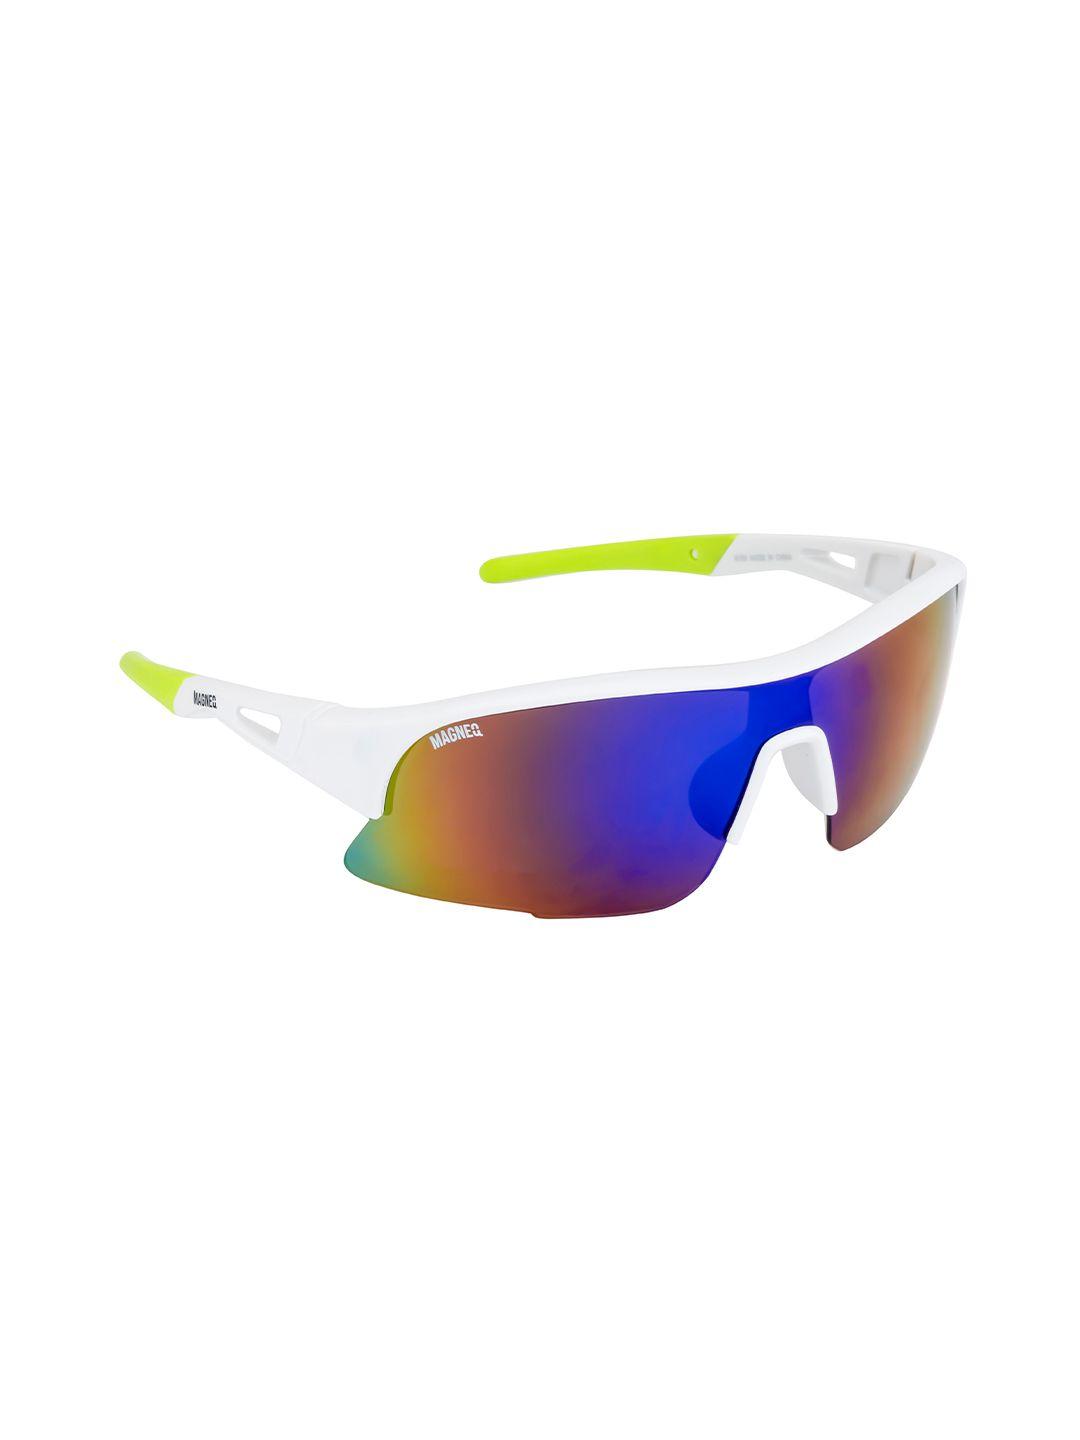 magneq sports sunglasses with uv protected lens mg 9185/s c3 7519